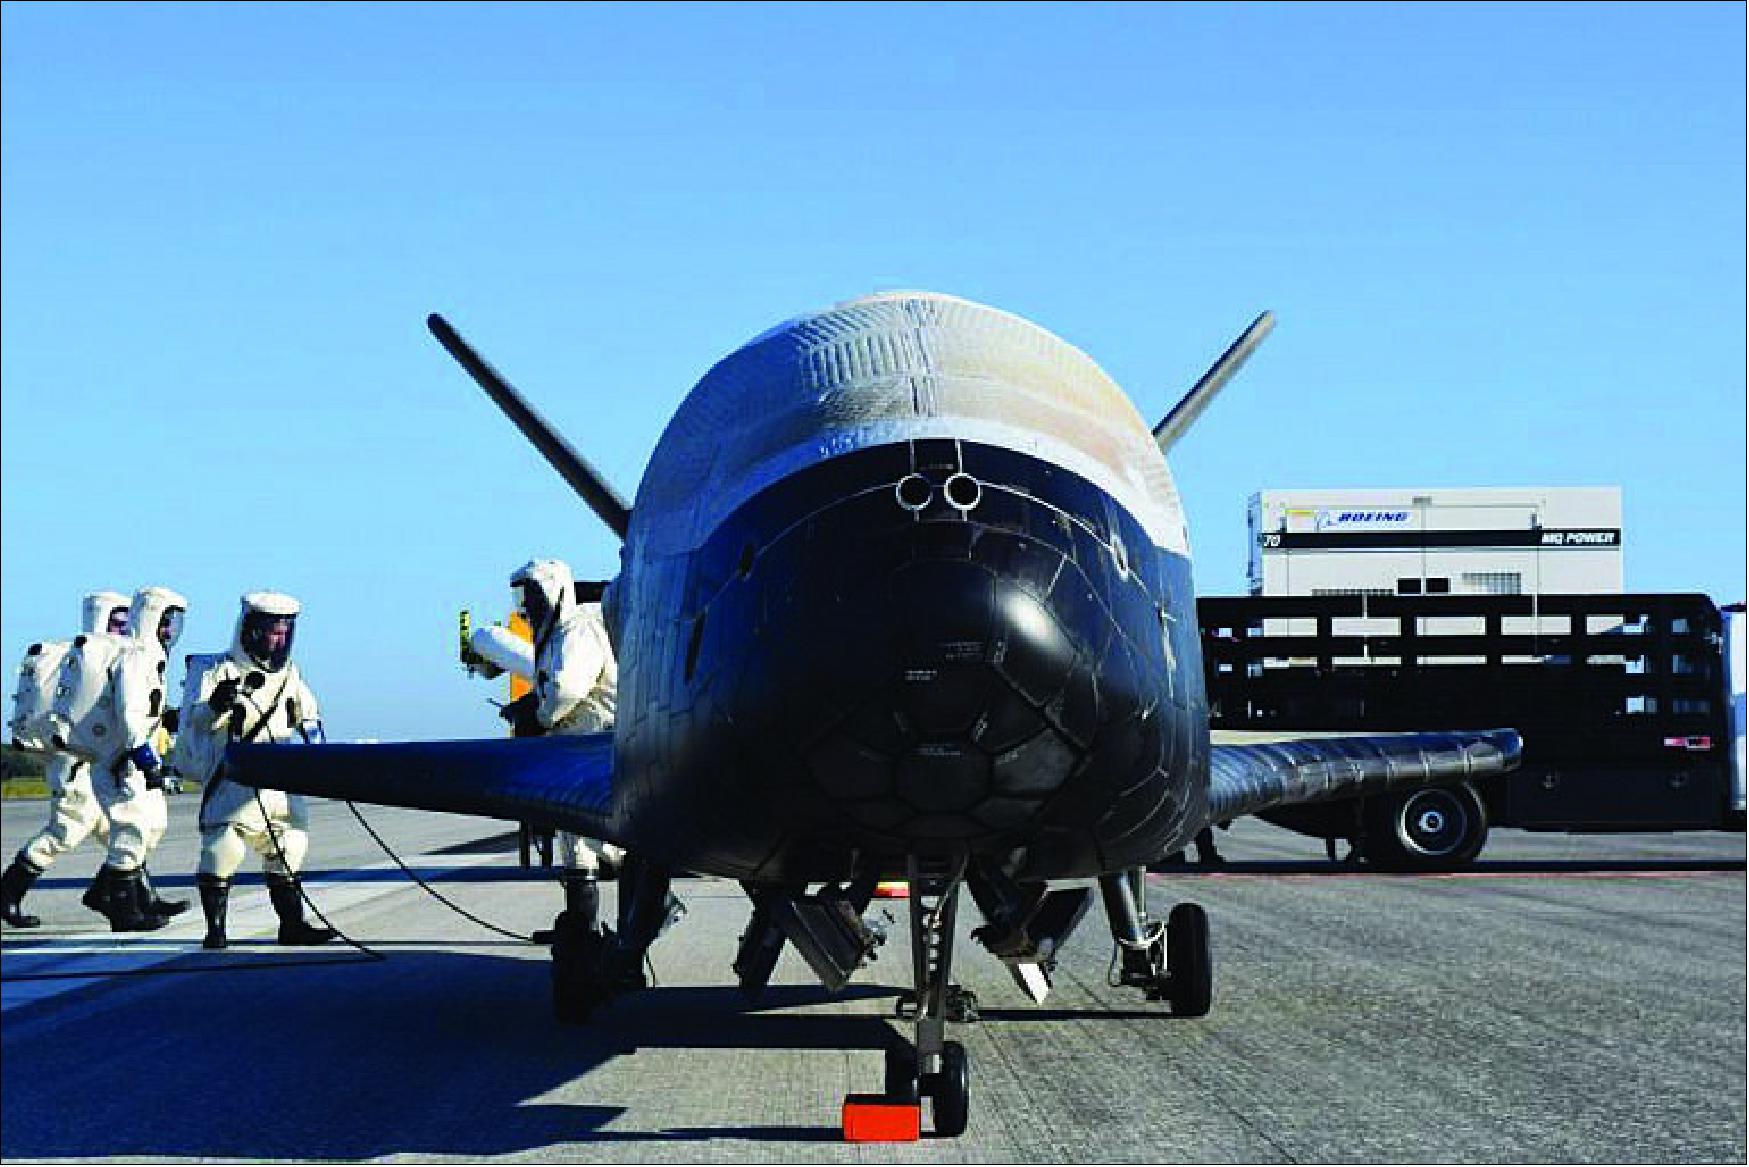 Figure 9: PRAM is an experiment onboard the U.S. military's X-37B spaceplane, shown here in 2017 (image credit: U.S. Air Force)